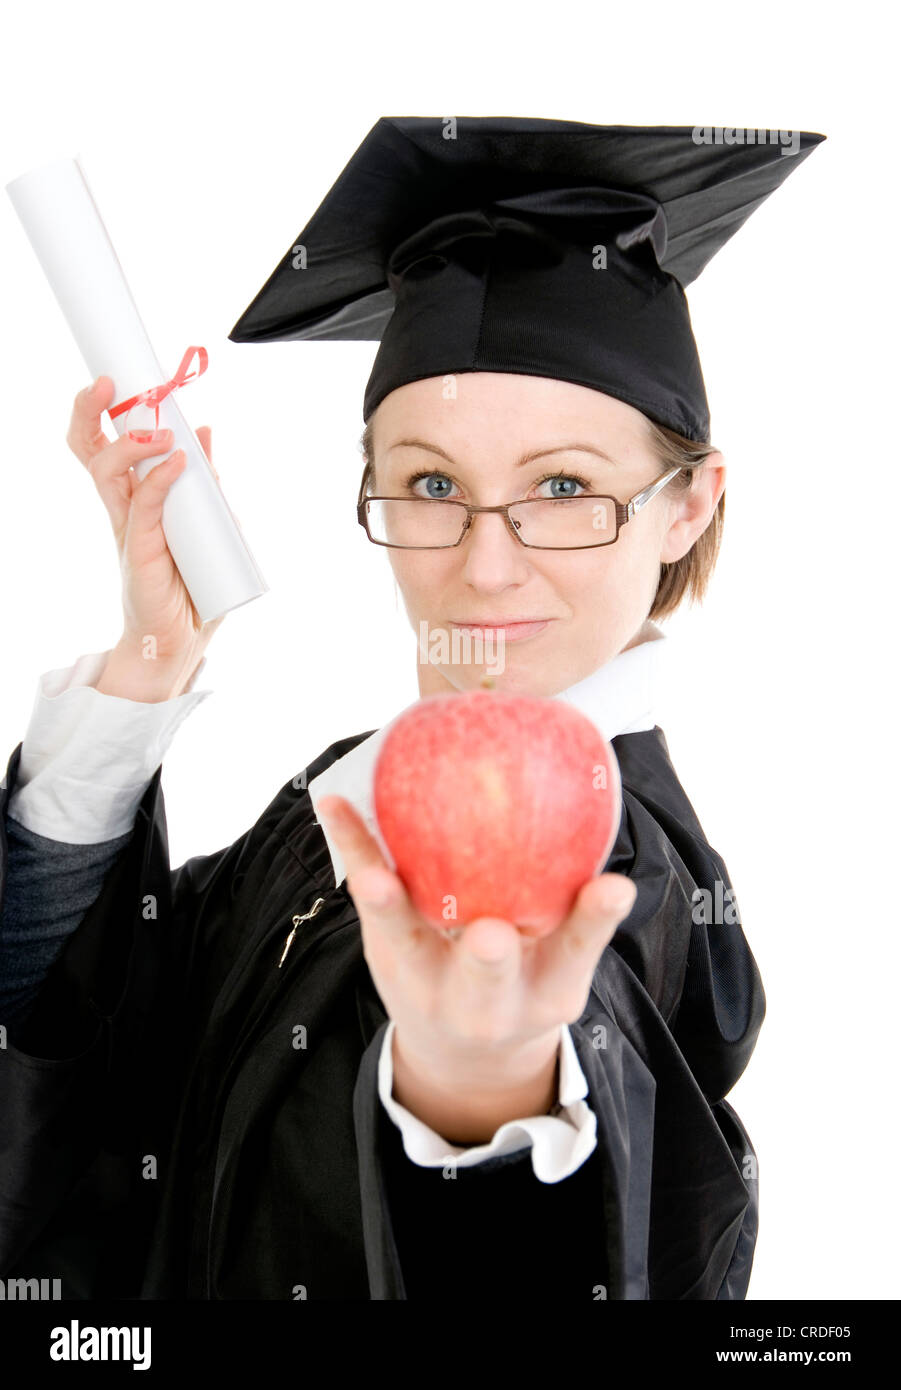 symbolic for brainfood, degree holder with apple Stock Photo